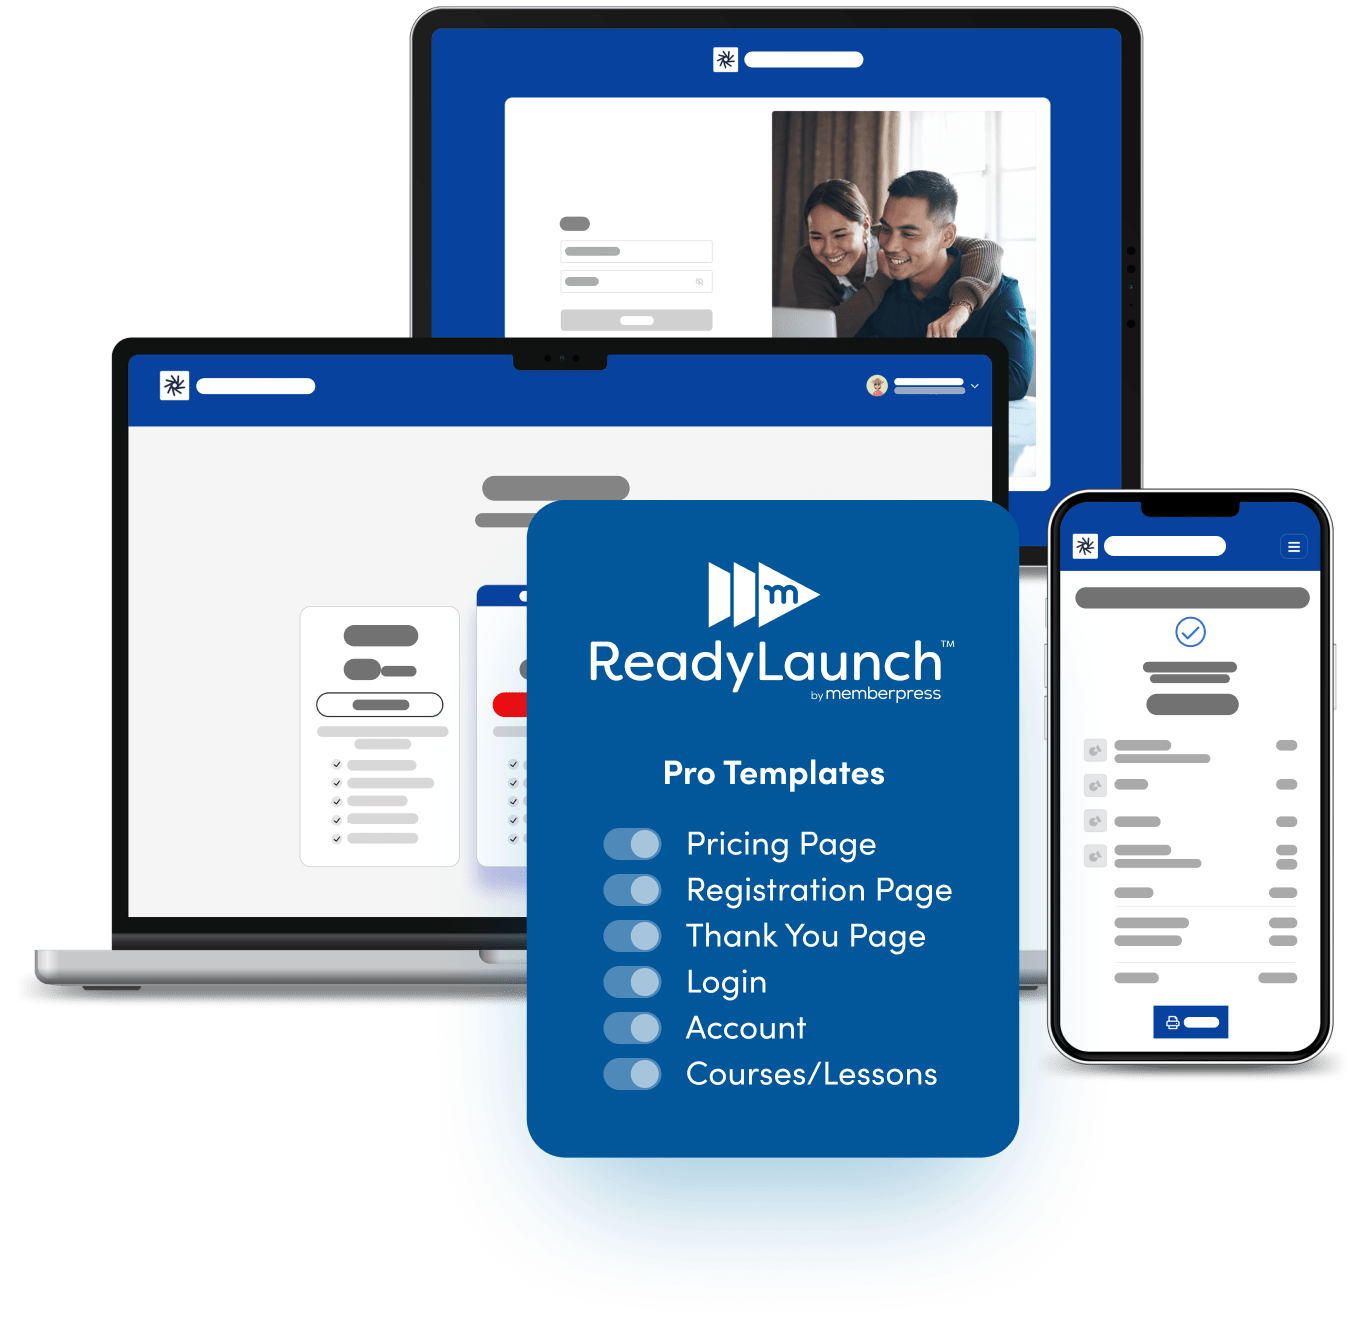 ReadyLaunch™ by MemberPress screenshot and features montage